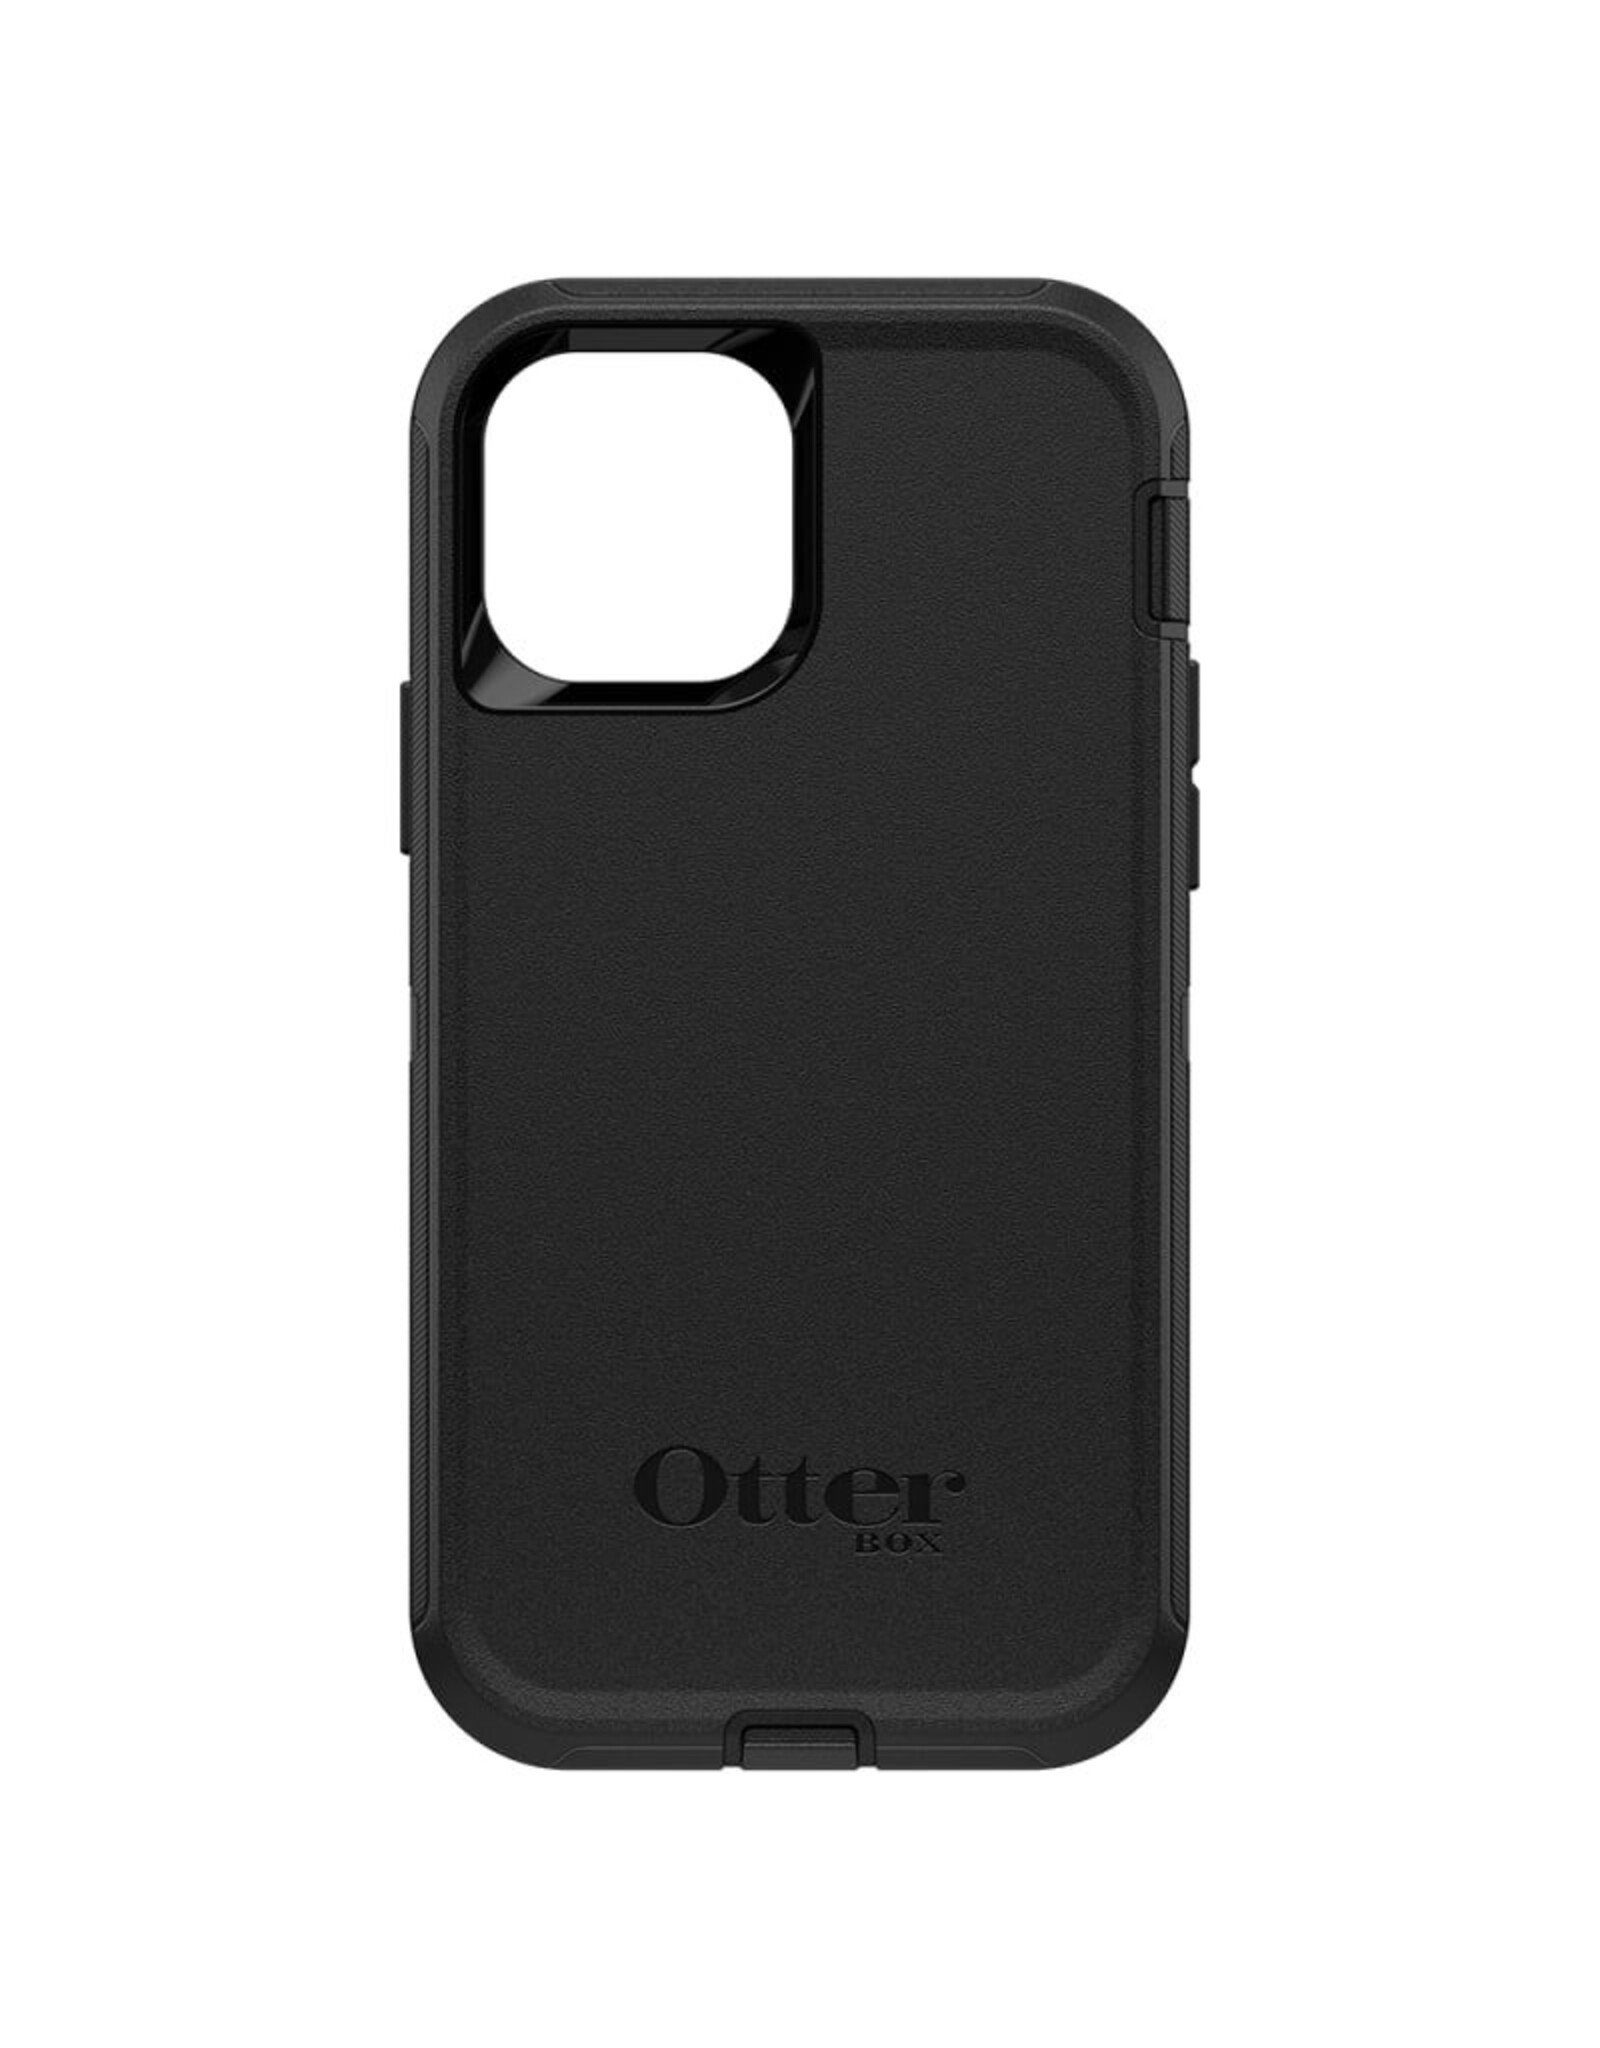 Otterbox OtterBox Defender Series Case For iPhone 12/12 Pro - Black